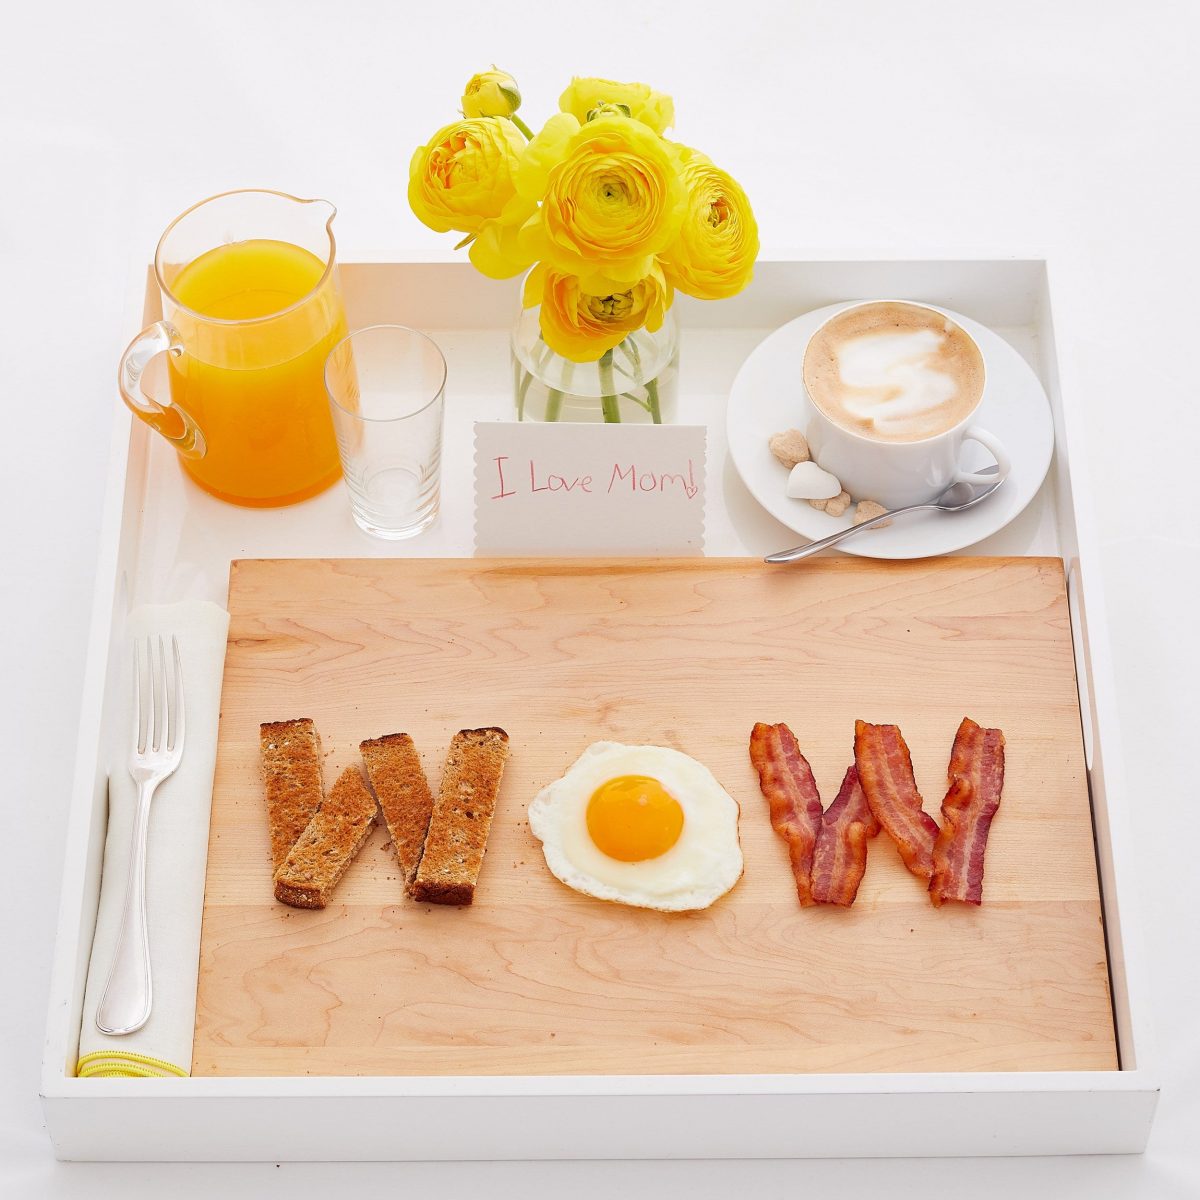 Darcy Miller, Darcy Miller Designs, Mother’s Day, breakfast in bed, play with your food, creative breakfast, birthday